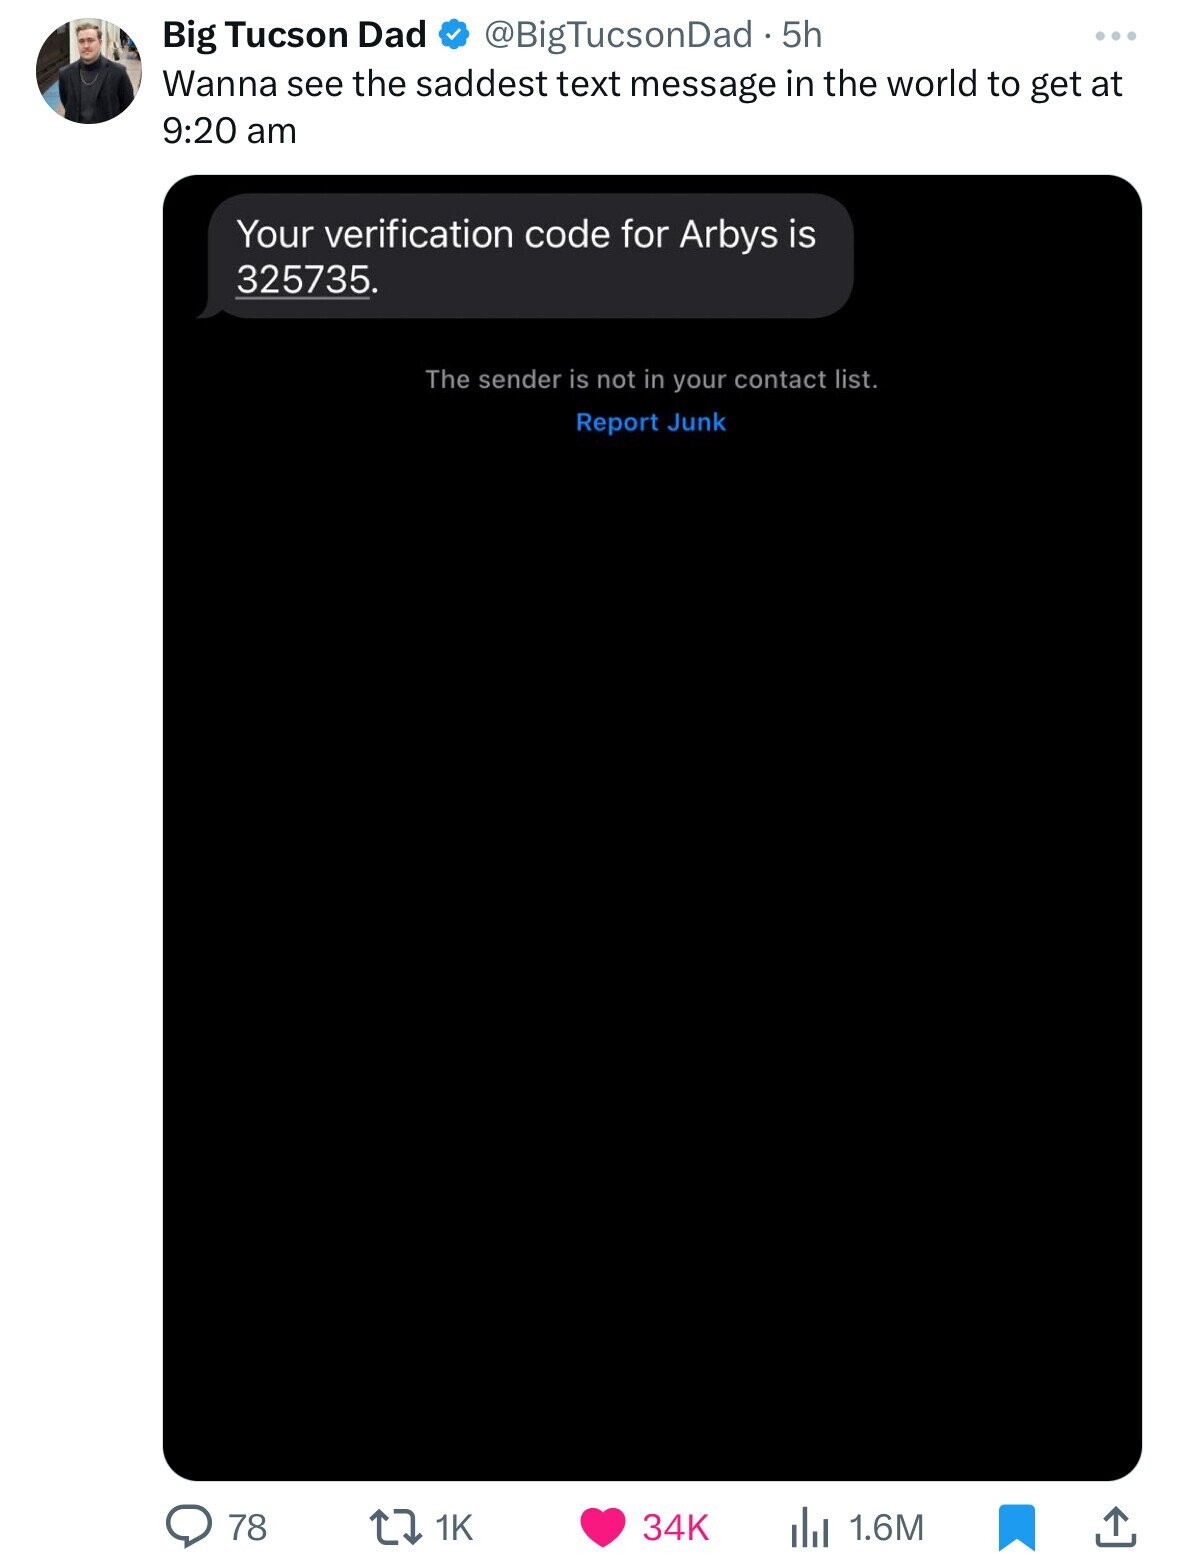 Big Tucson Dad @BigTucsonDad.5h Wanna see the saddest text message in the world to get at 9:20 am Your verification code for Arbys is 325735. The sender is not in your contact list. Report Junk 78 1K 34K 1.6M 